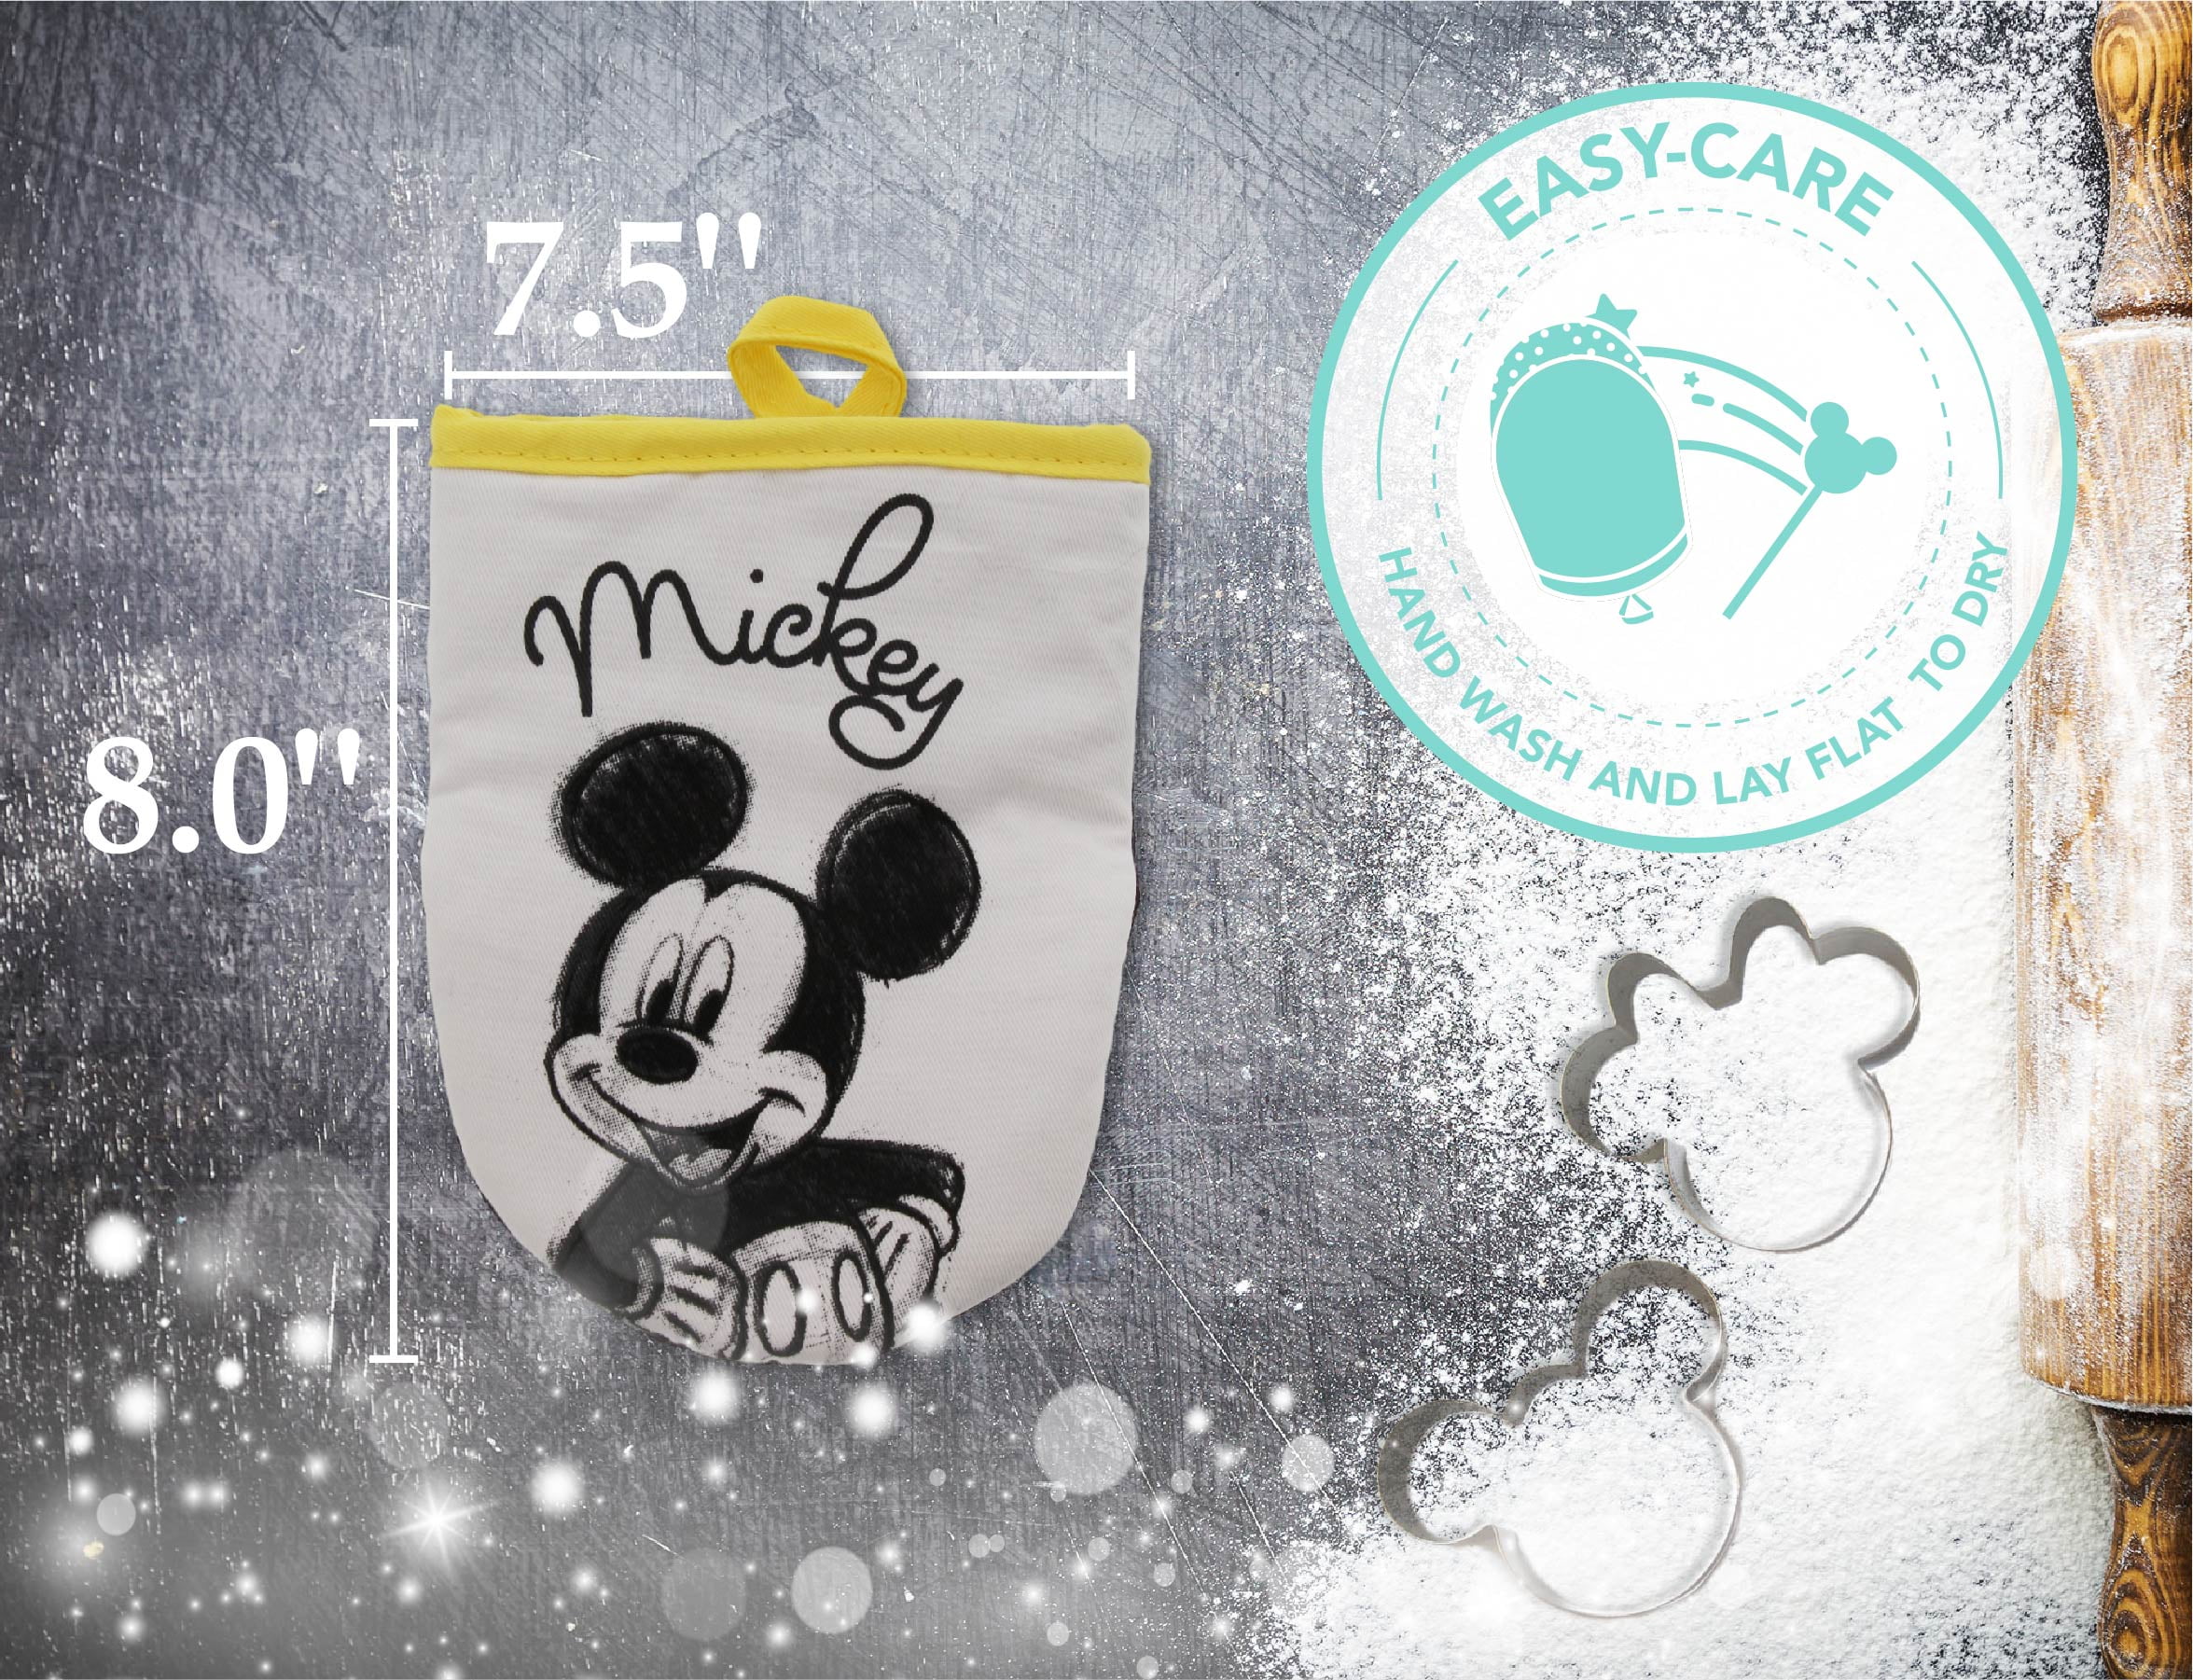 Disney Kitchen Neoprene Mini Oven Mitts, 2pk-Heat Resistant Oven Gloves  with Insulation Ideal for Handling Hot Kitchenware-Non-Slip Grip, Hanging  Loop, 5.5 x 7 Inches - Minnie Bows and Mickey Dots 